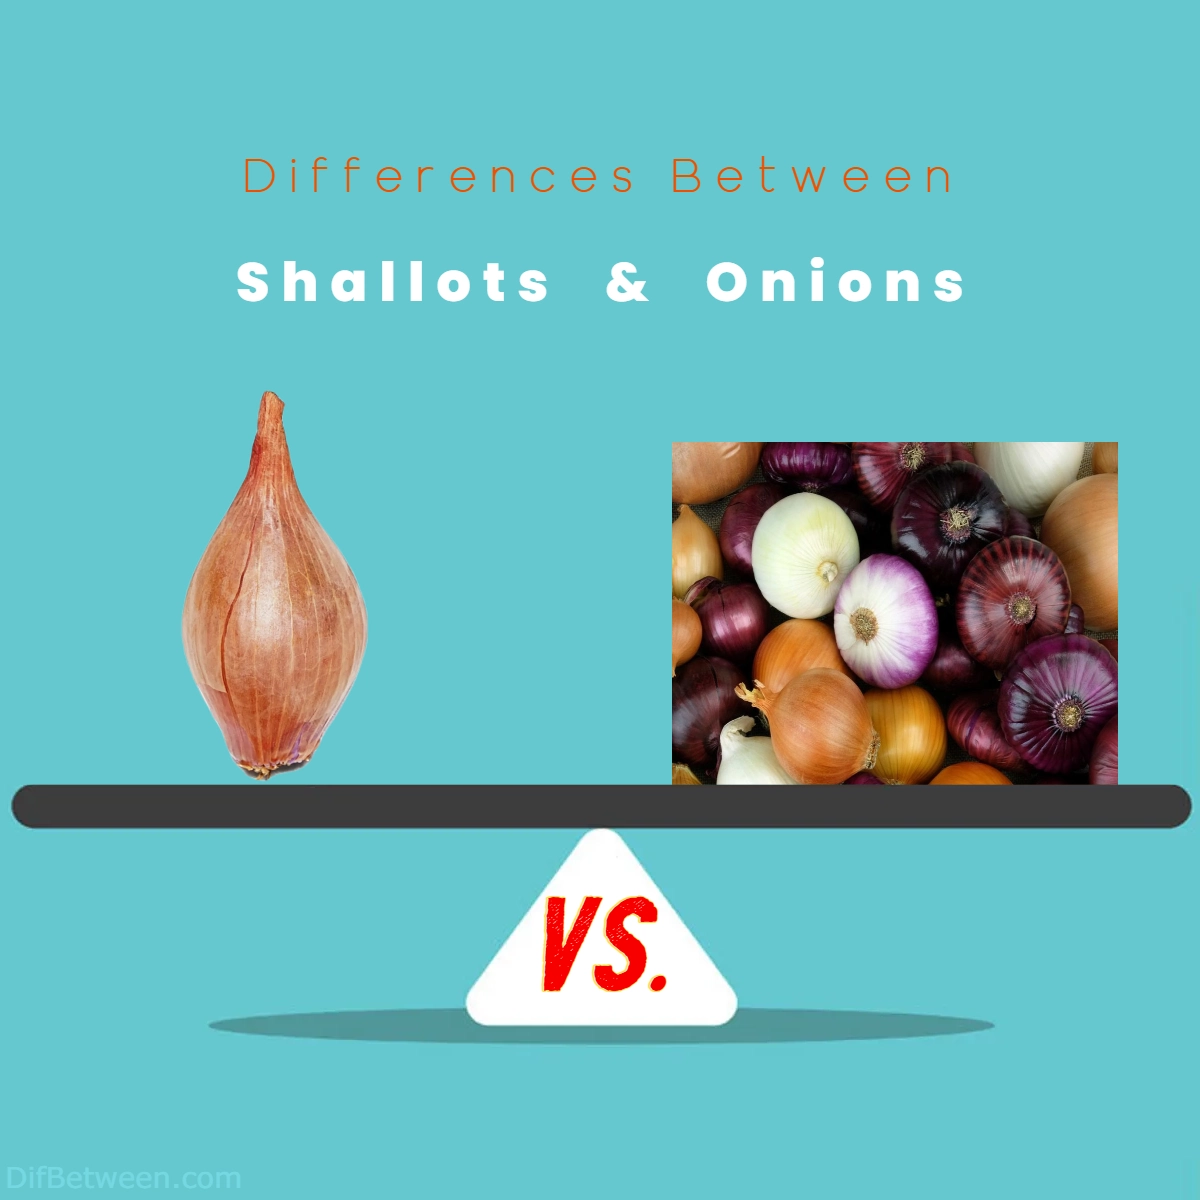 Differences Between Shallots and Onions